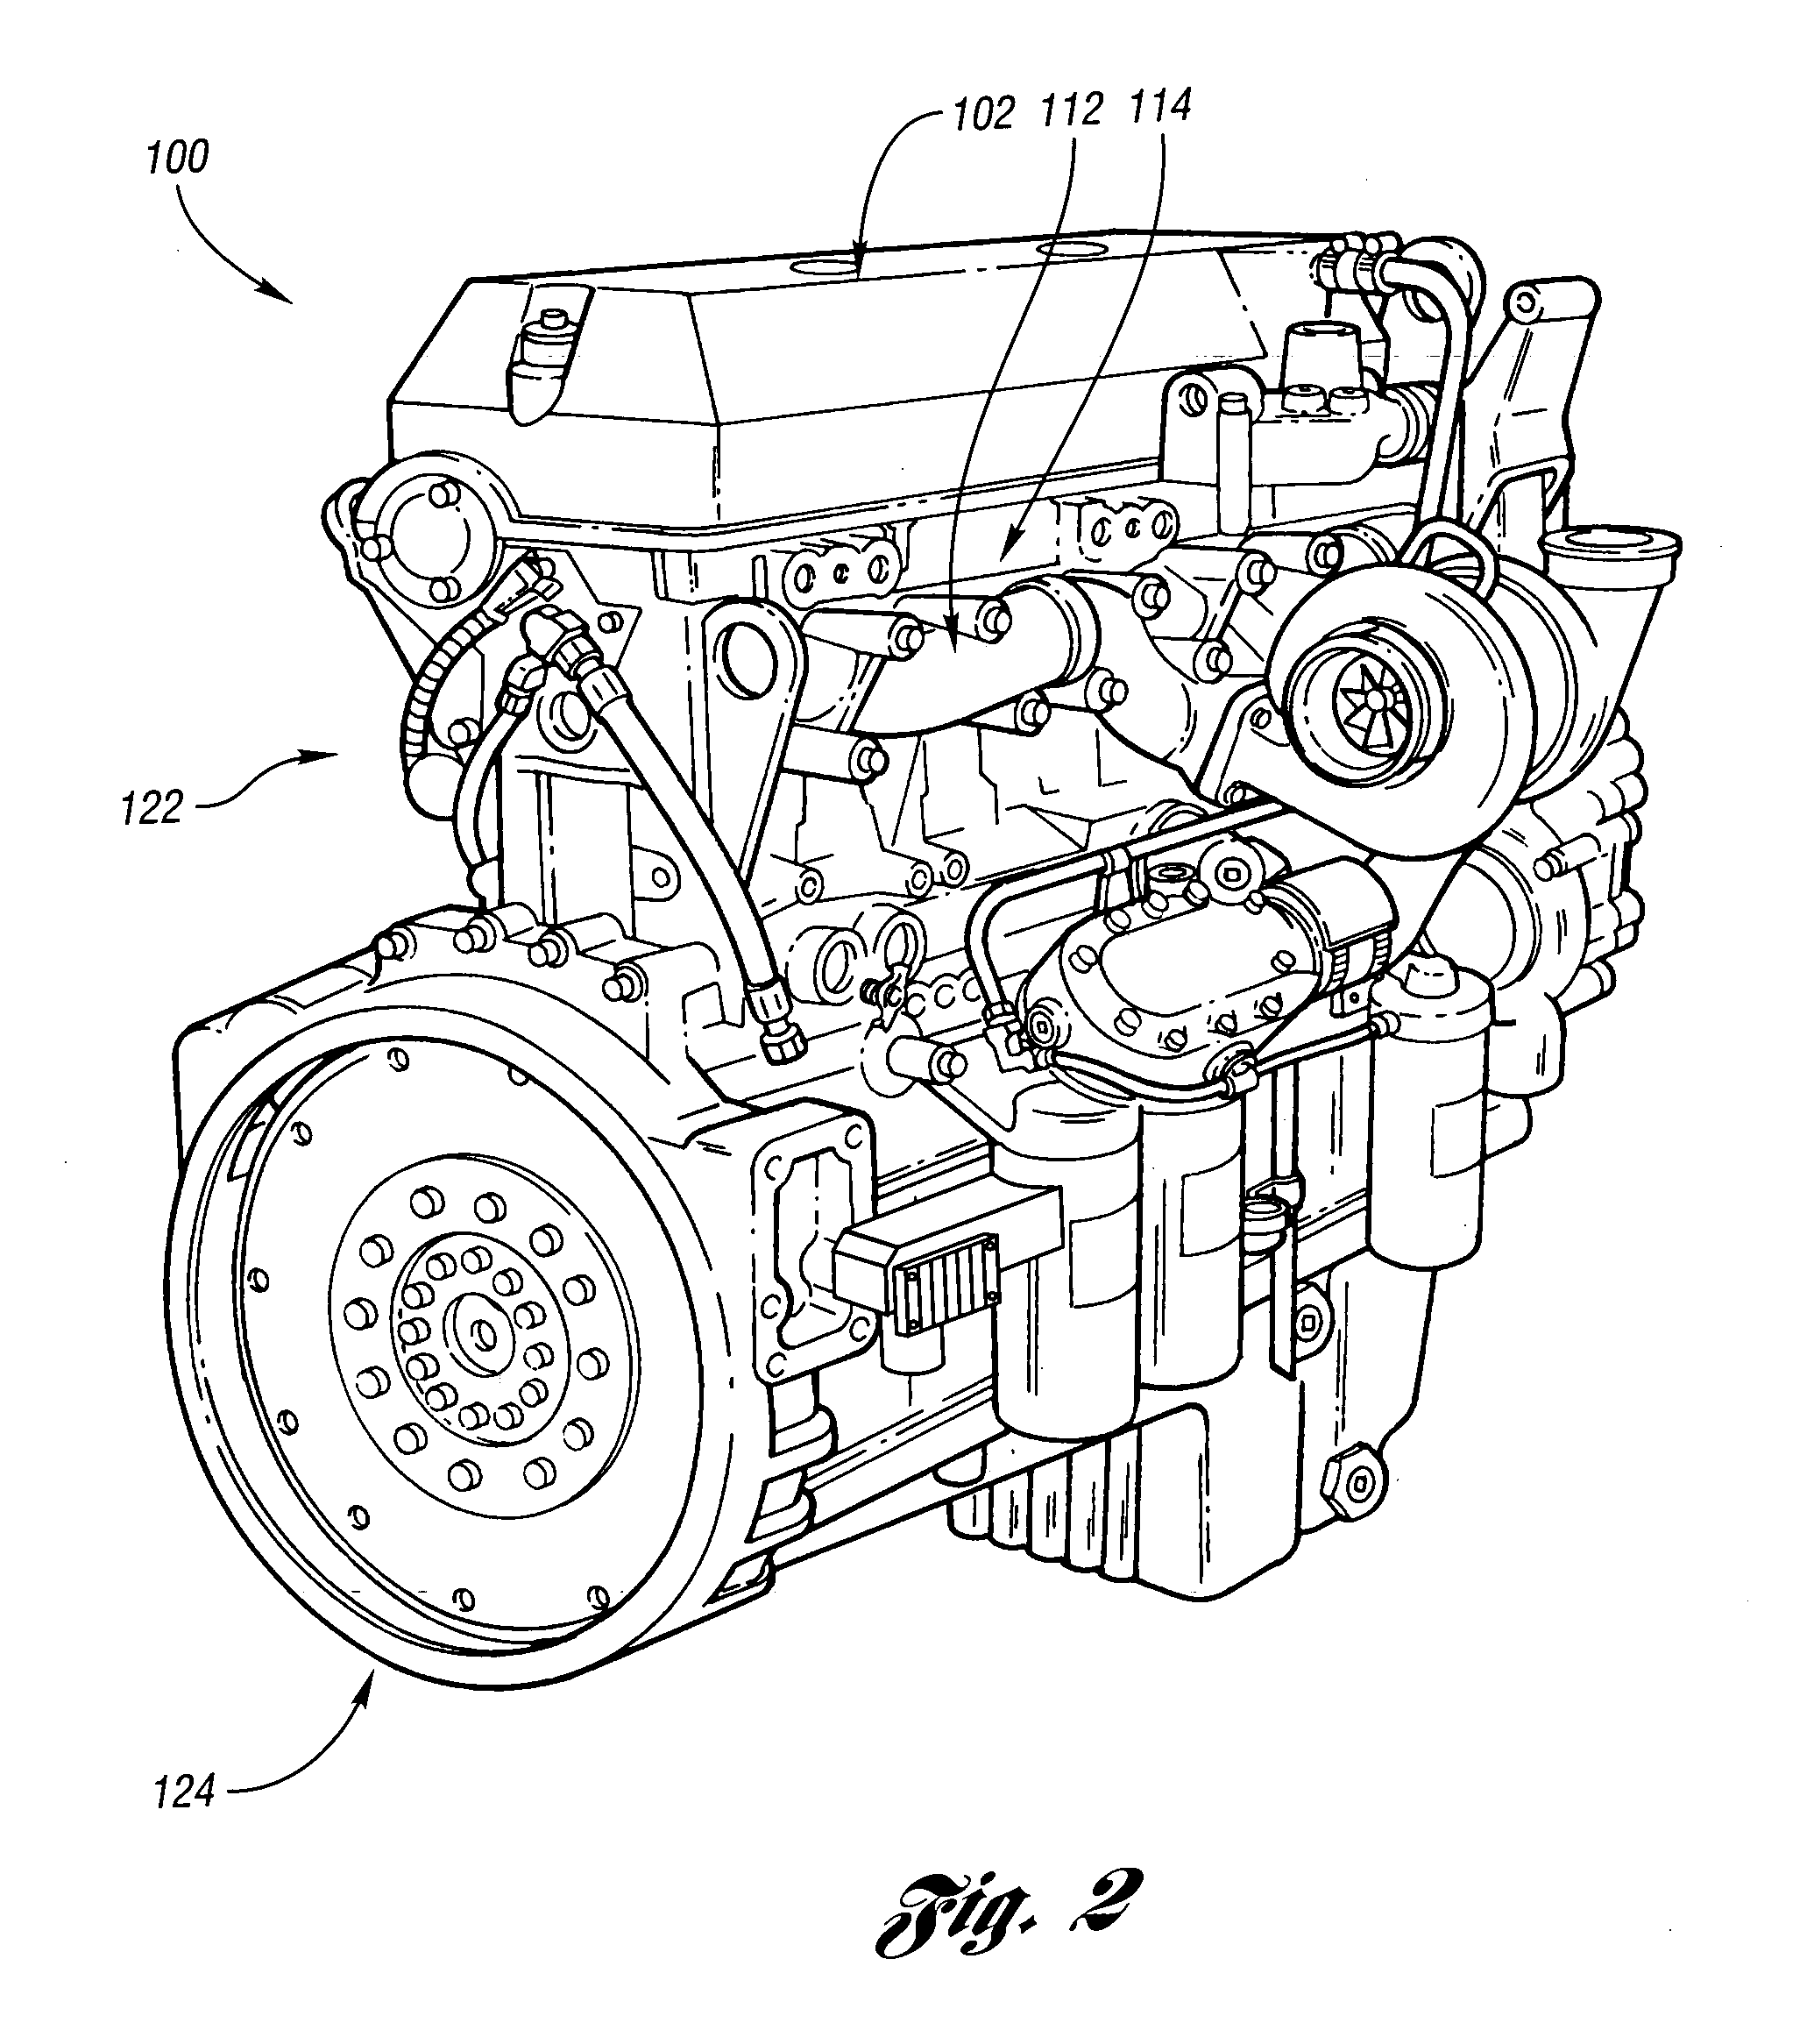 System and method for reducing compression ignition engine emissions